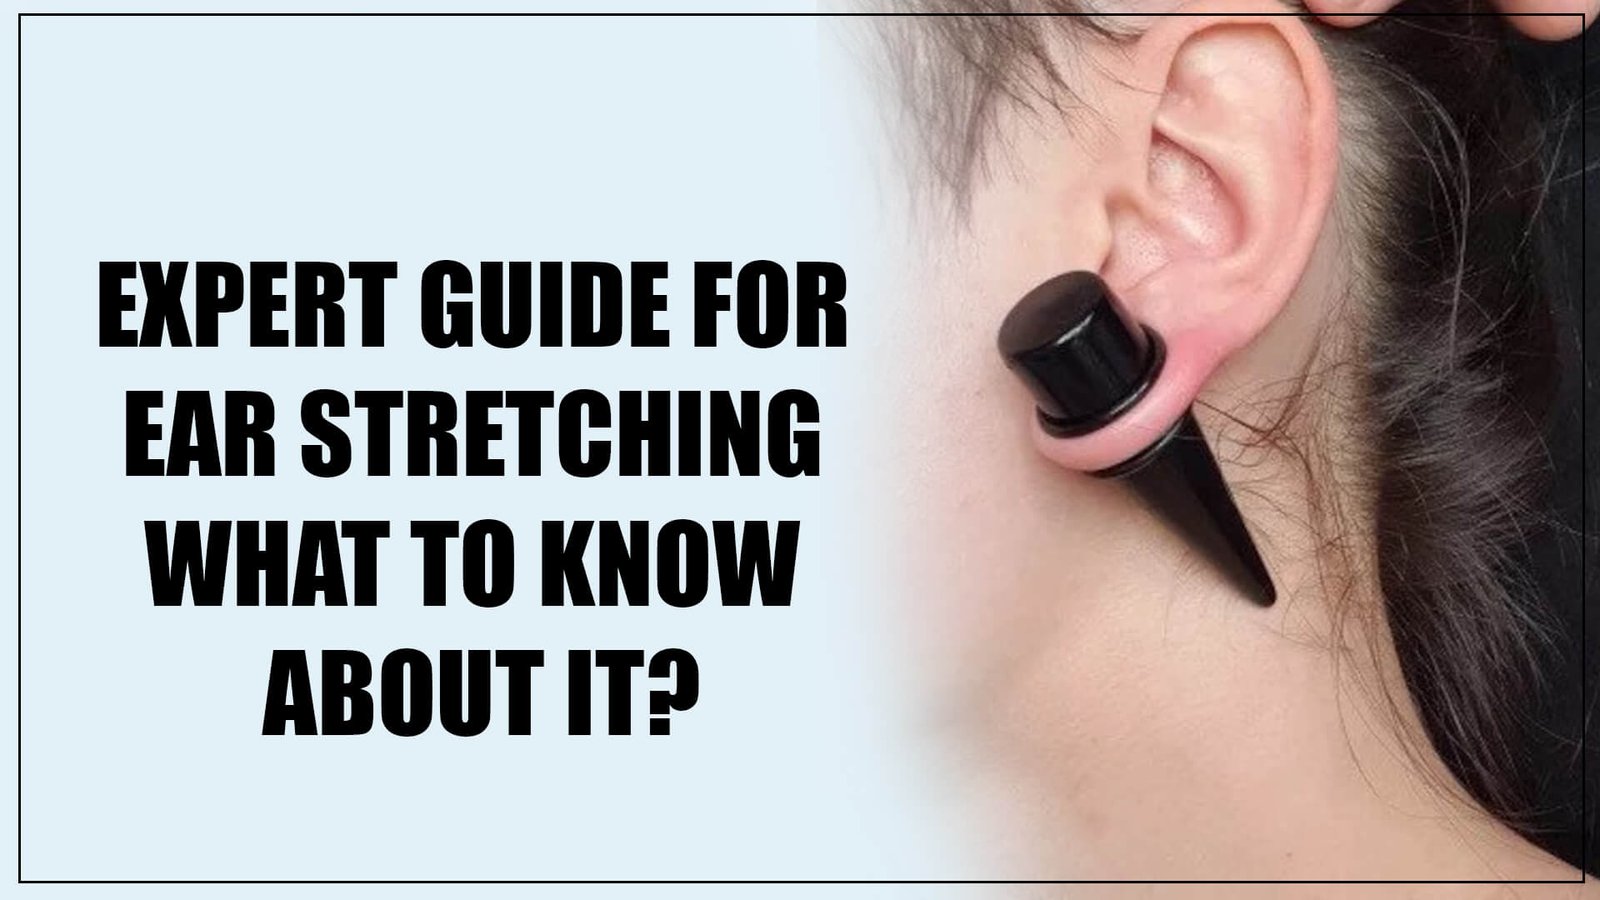 Expert Guide for Ear Stretching What to Know About it